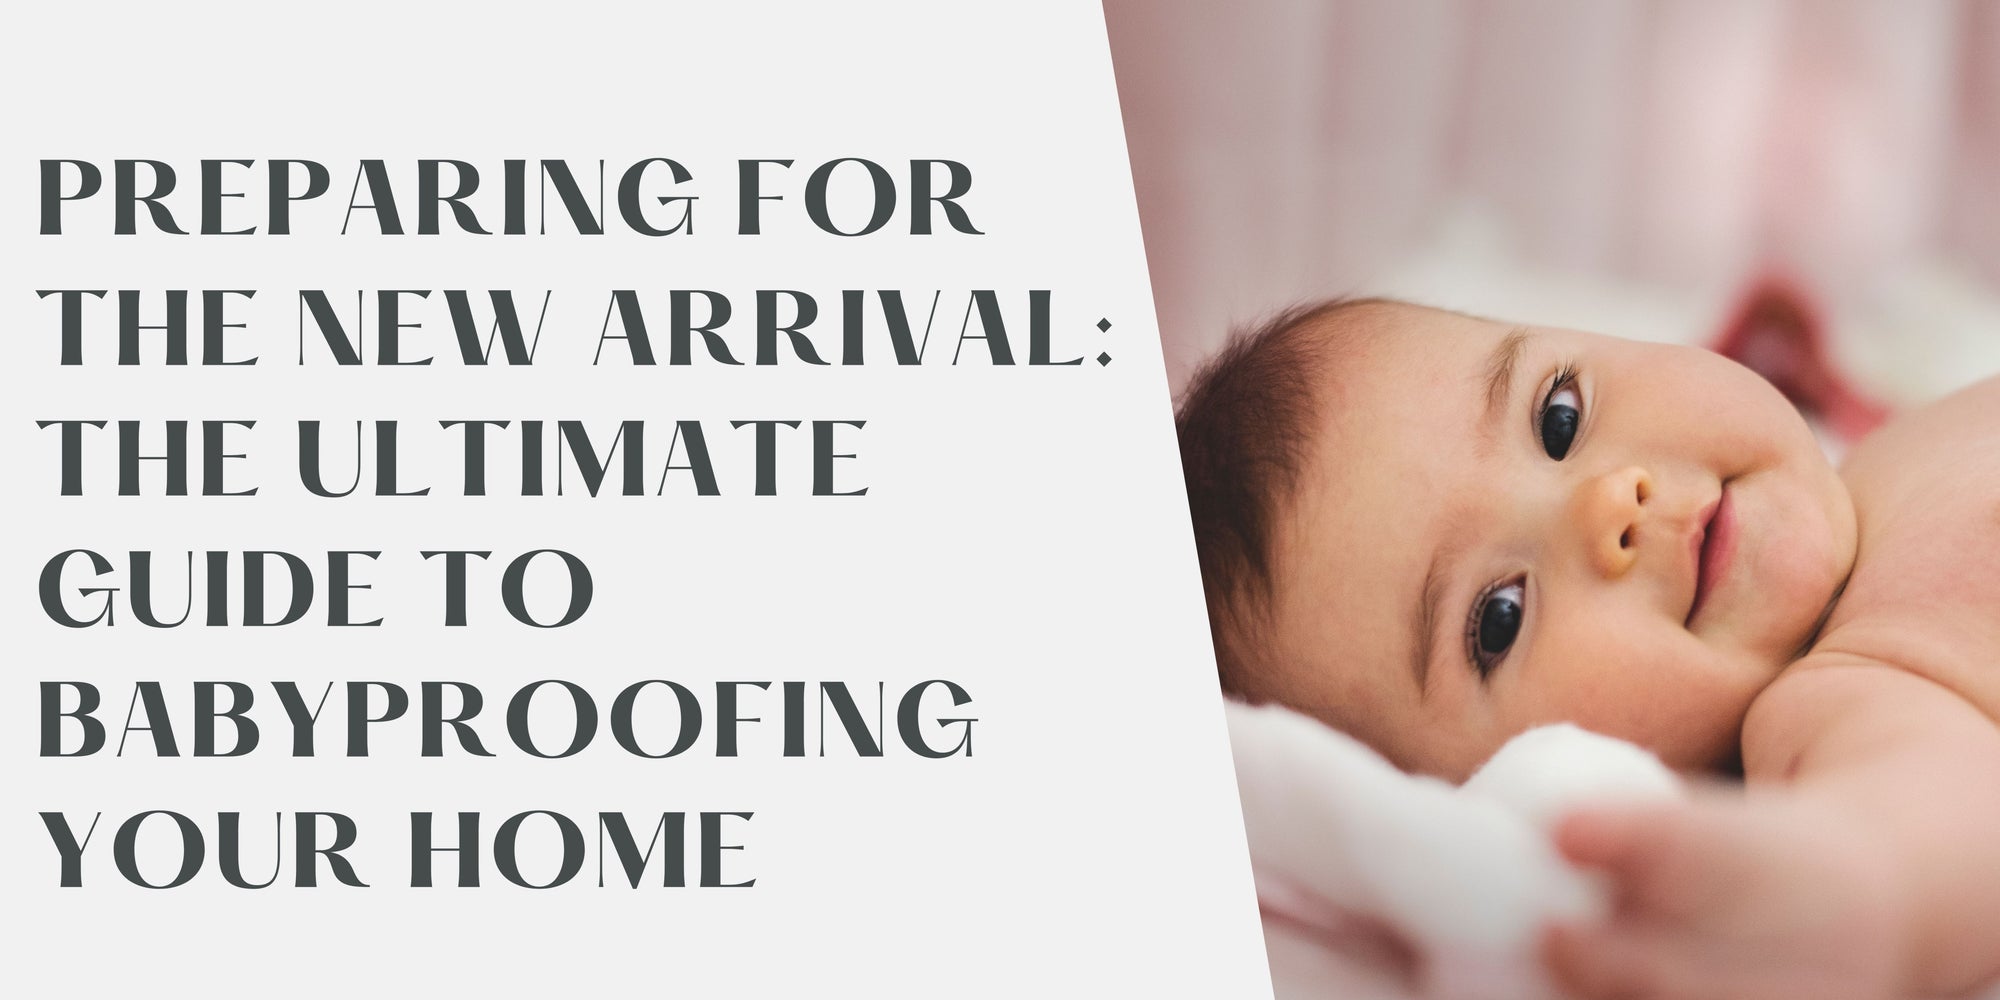 Preparing For the New Arrival: The Ultimate Guide to Babyproofing Your Home